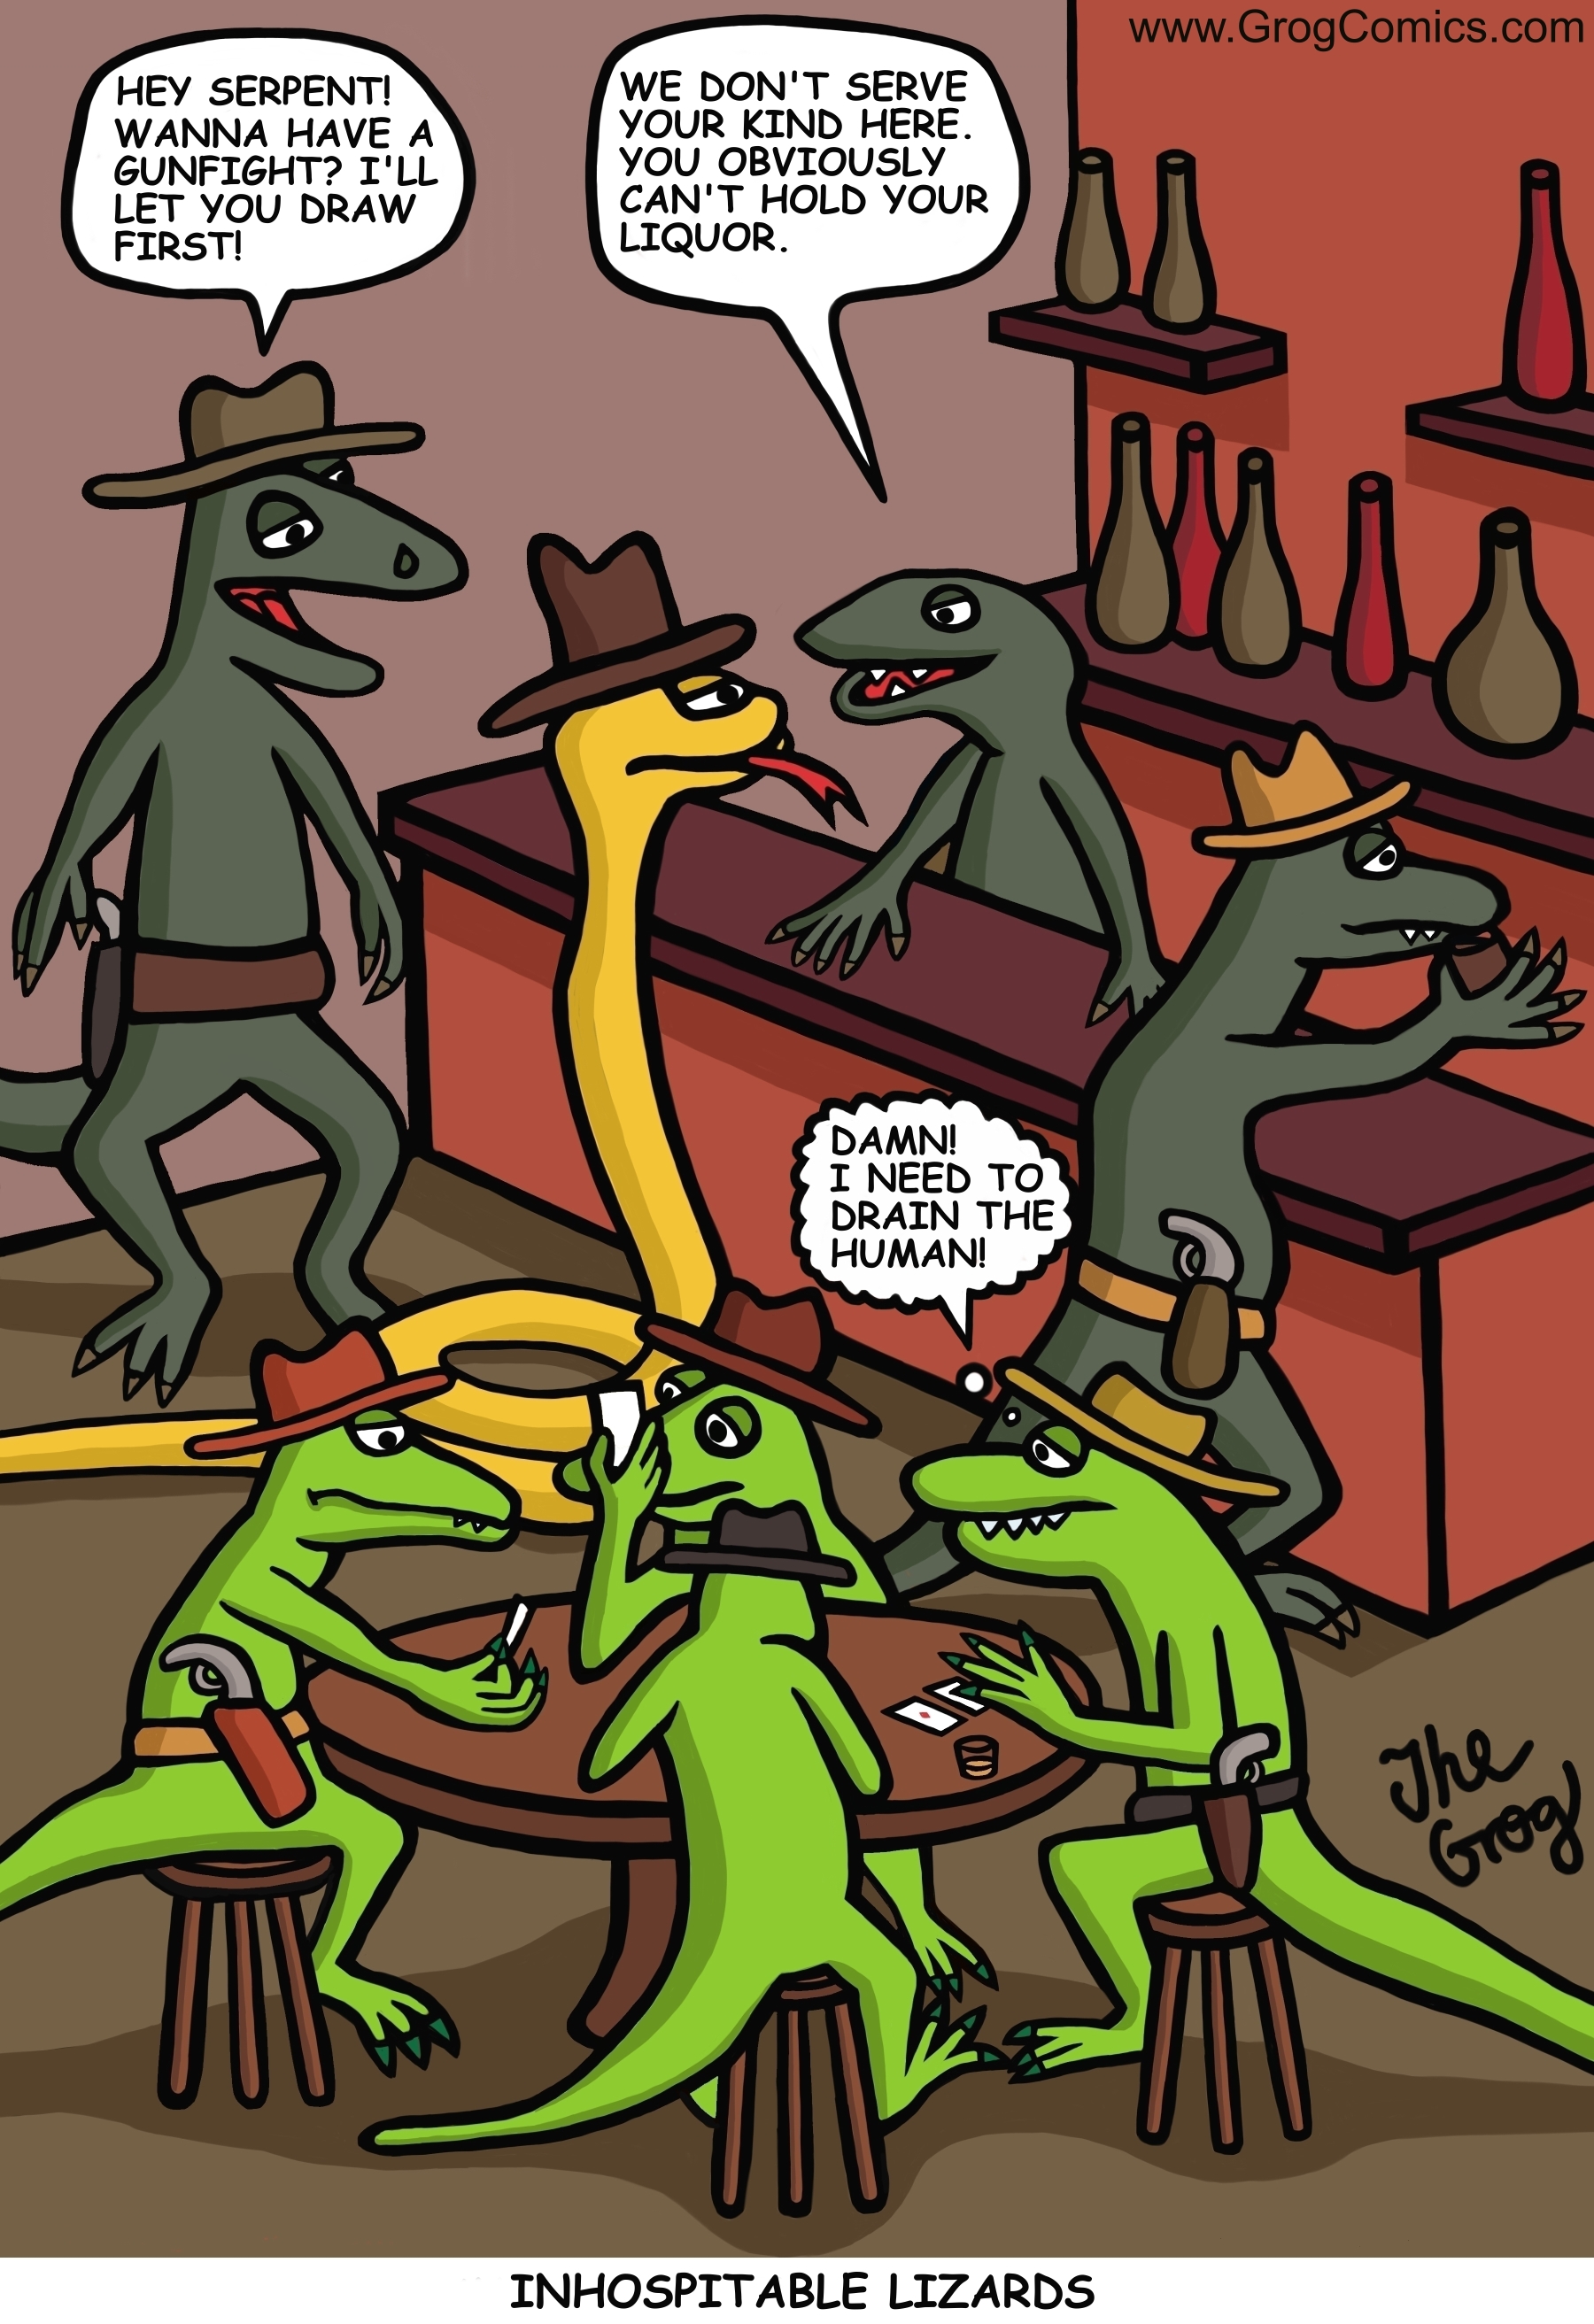 A snake walks into a bar full of lizards. The lizard behind the bar says, “We don’t serve your kind here. You obviously can’t hold your liquor.”